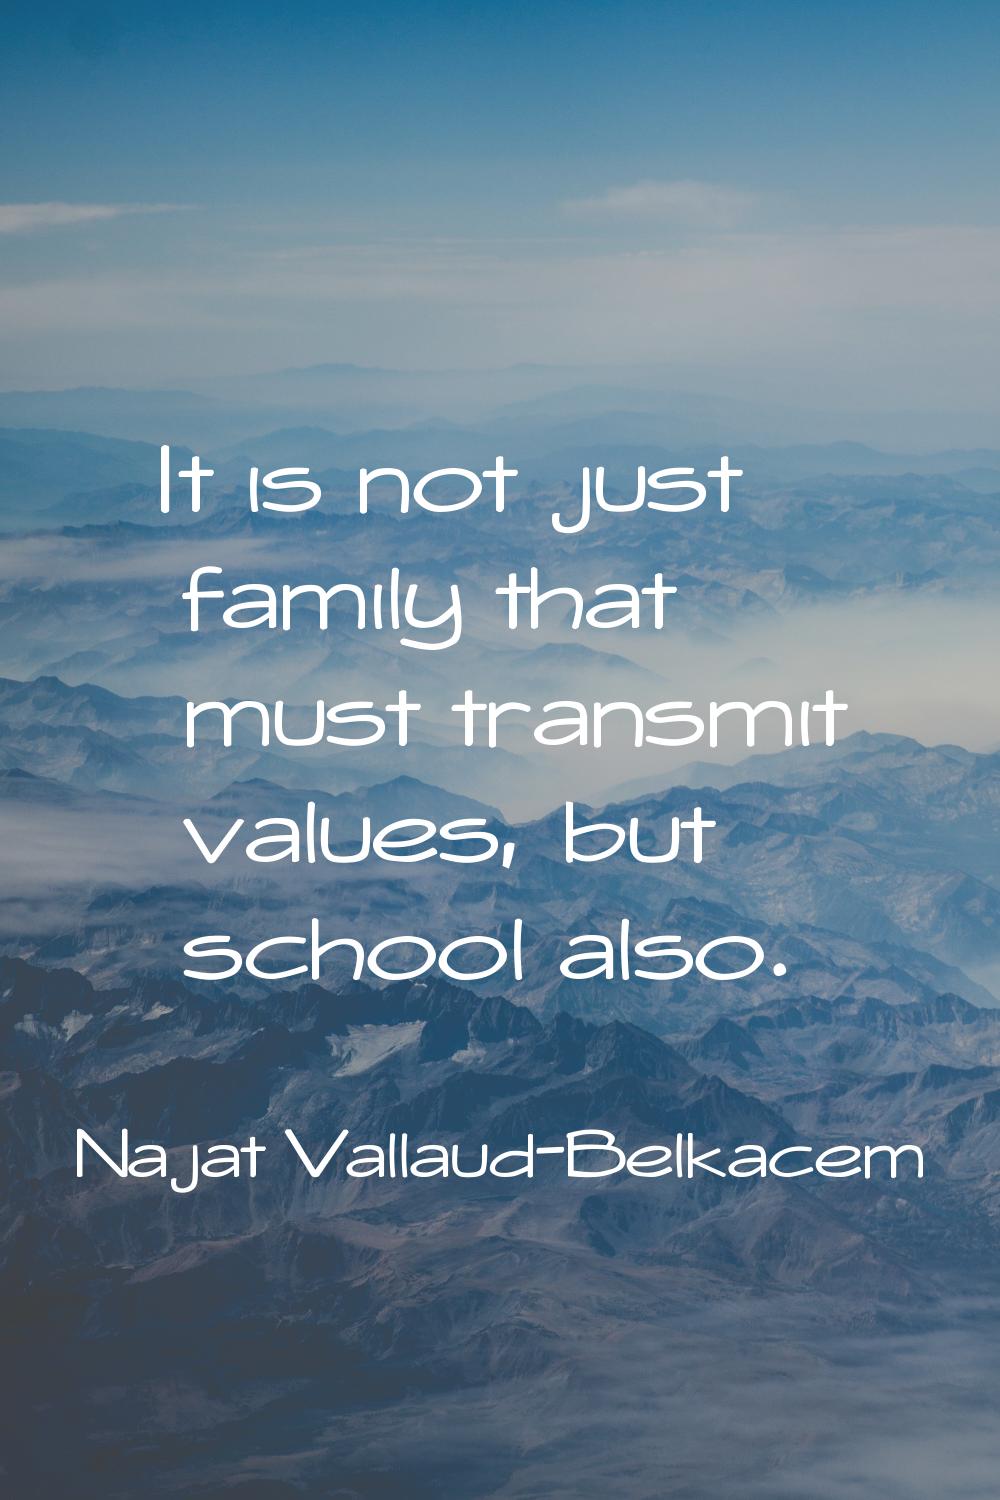 It is not just family that must transmit values, but school also.